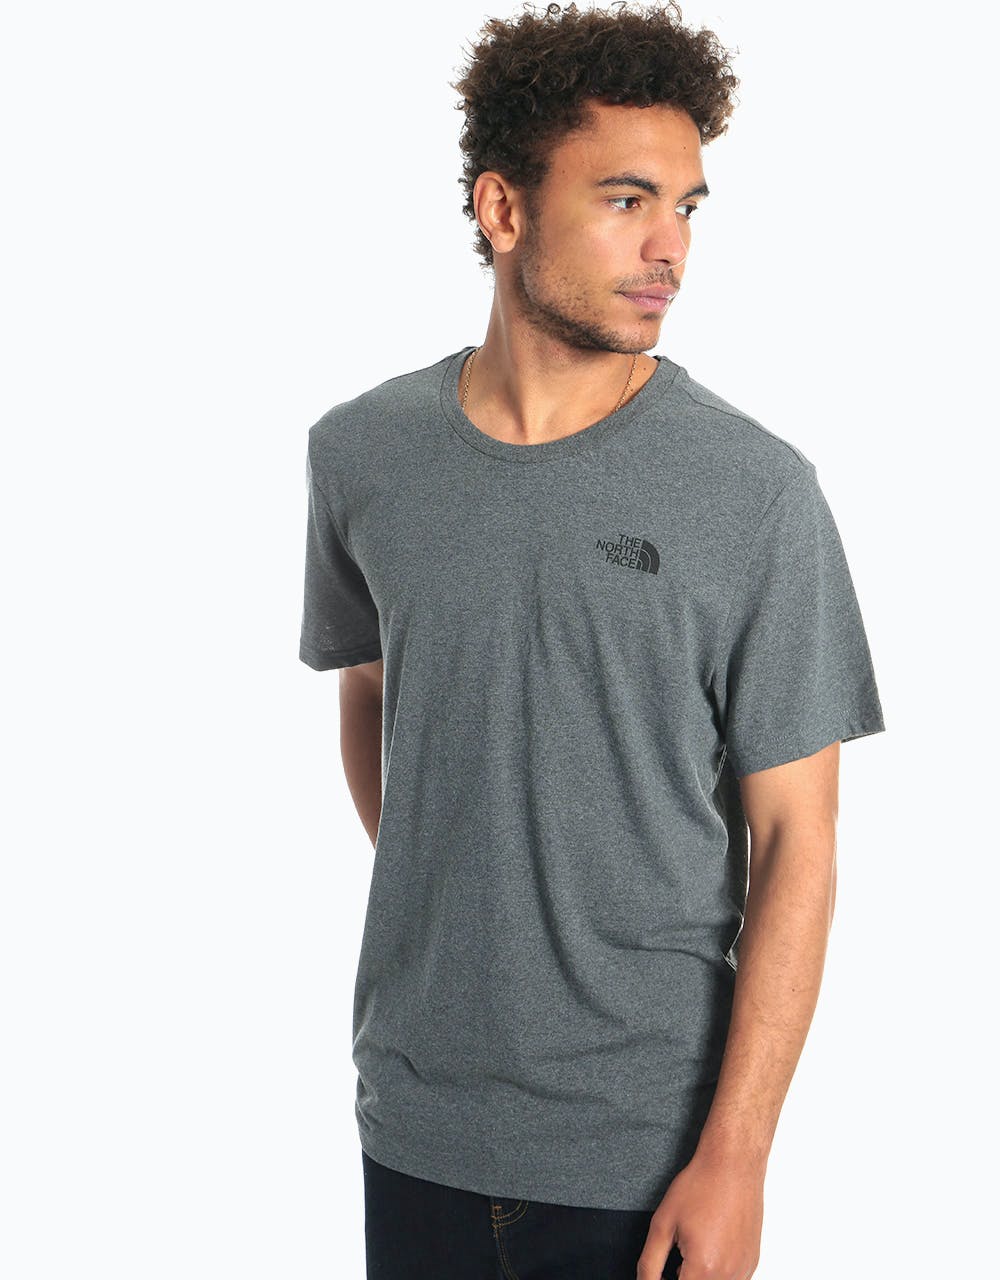 The North Face S/S Simple Dome T-Shirt - Medium Grey Heather